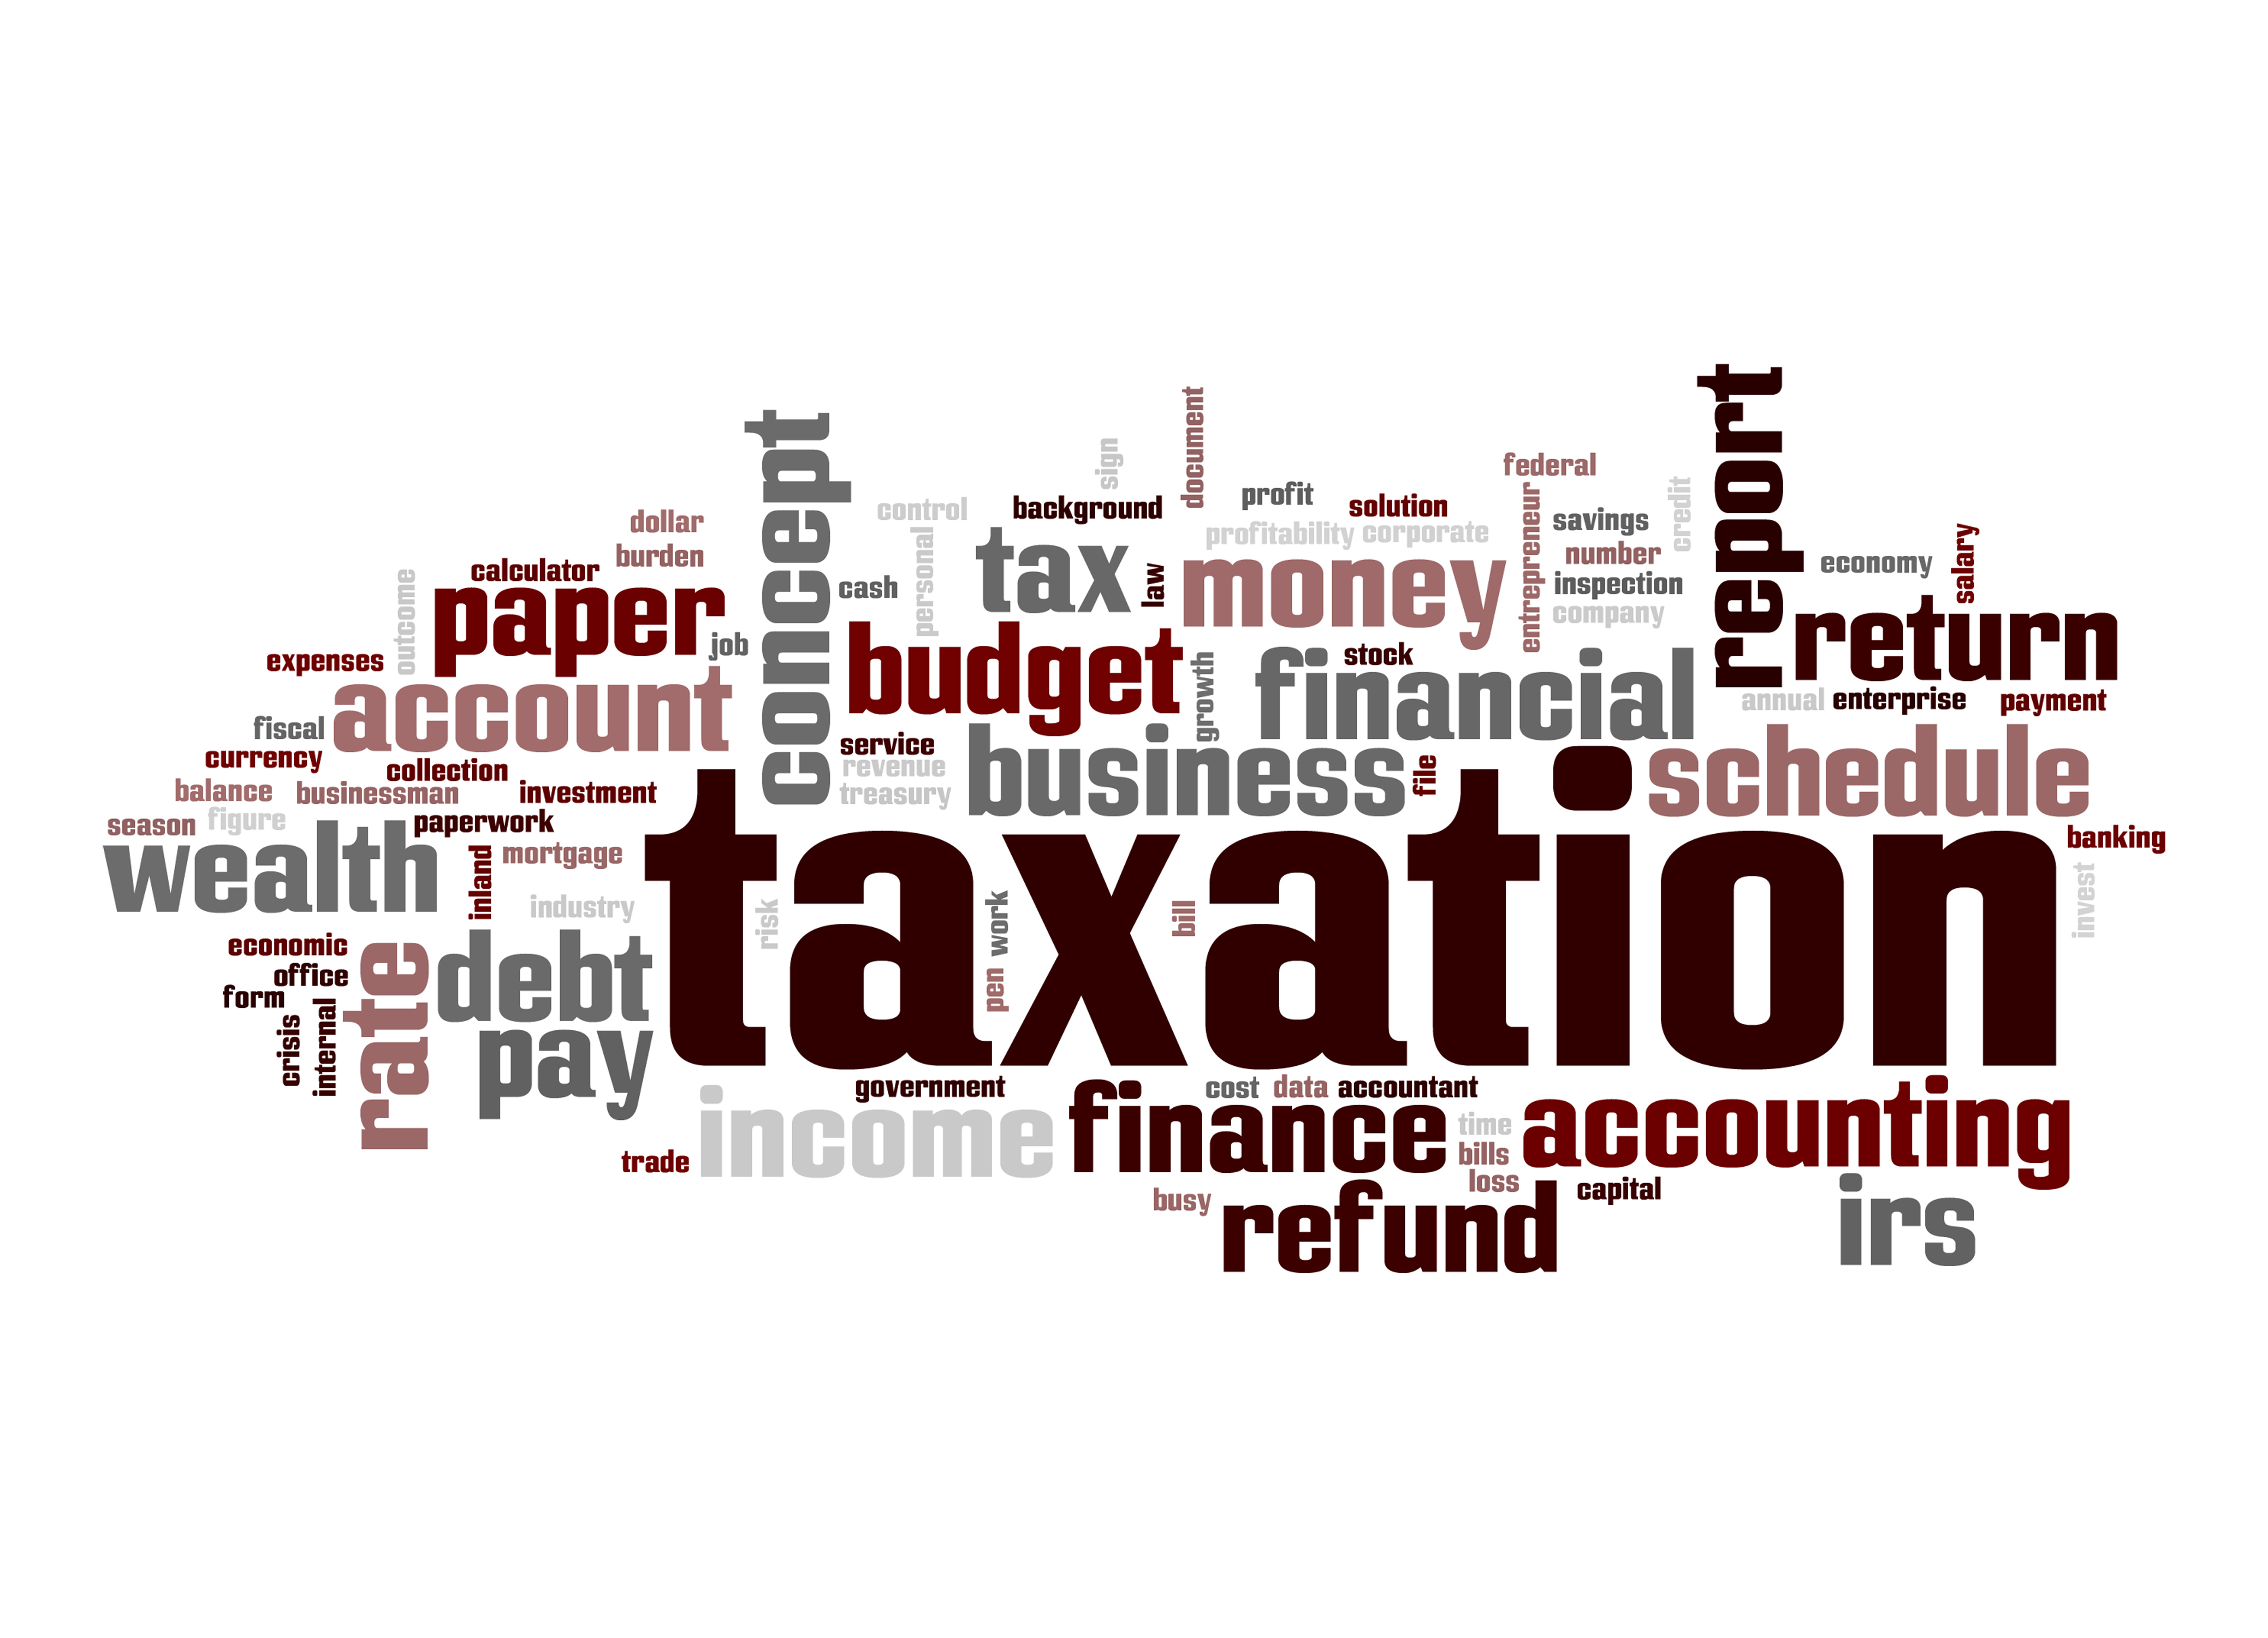 what is representation and taxation